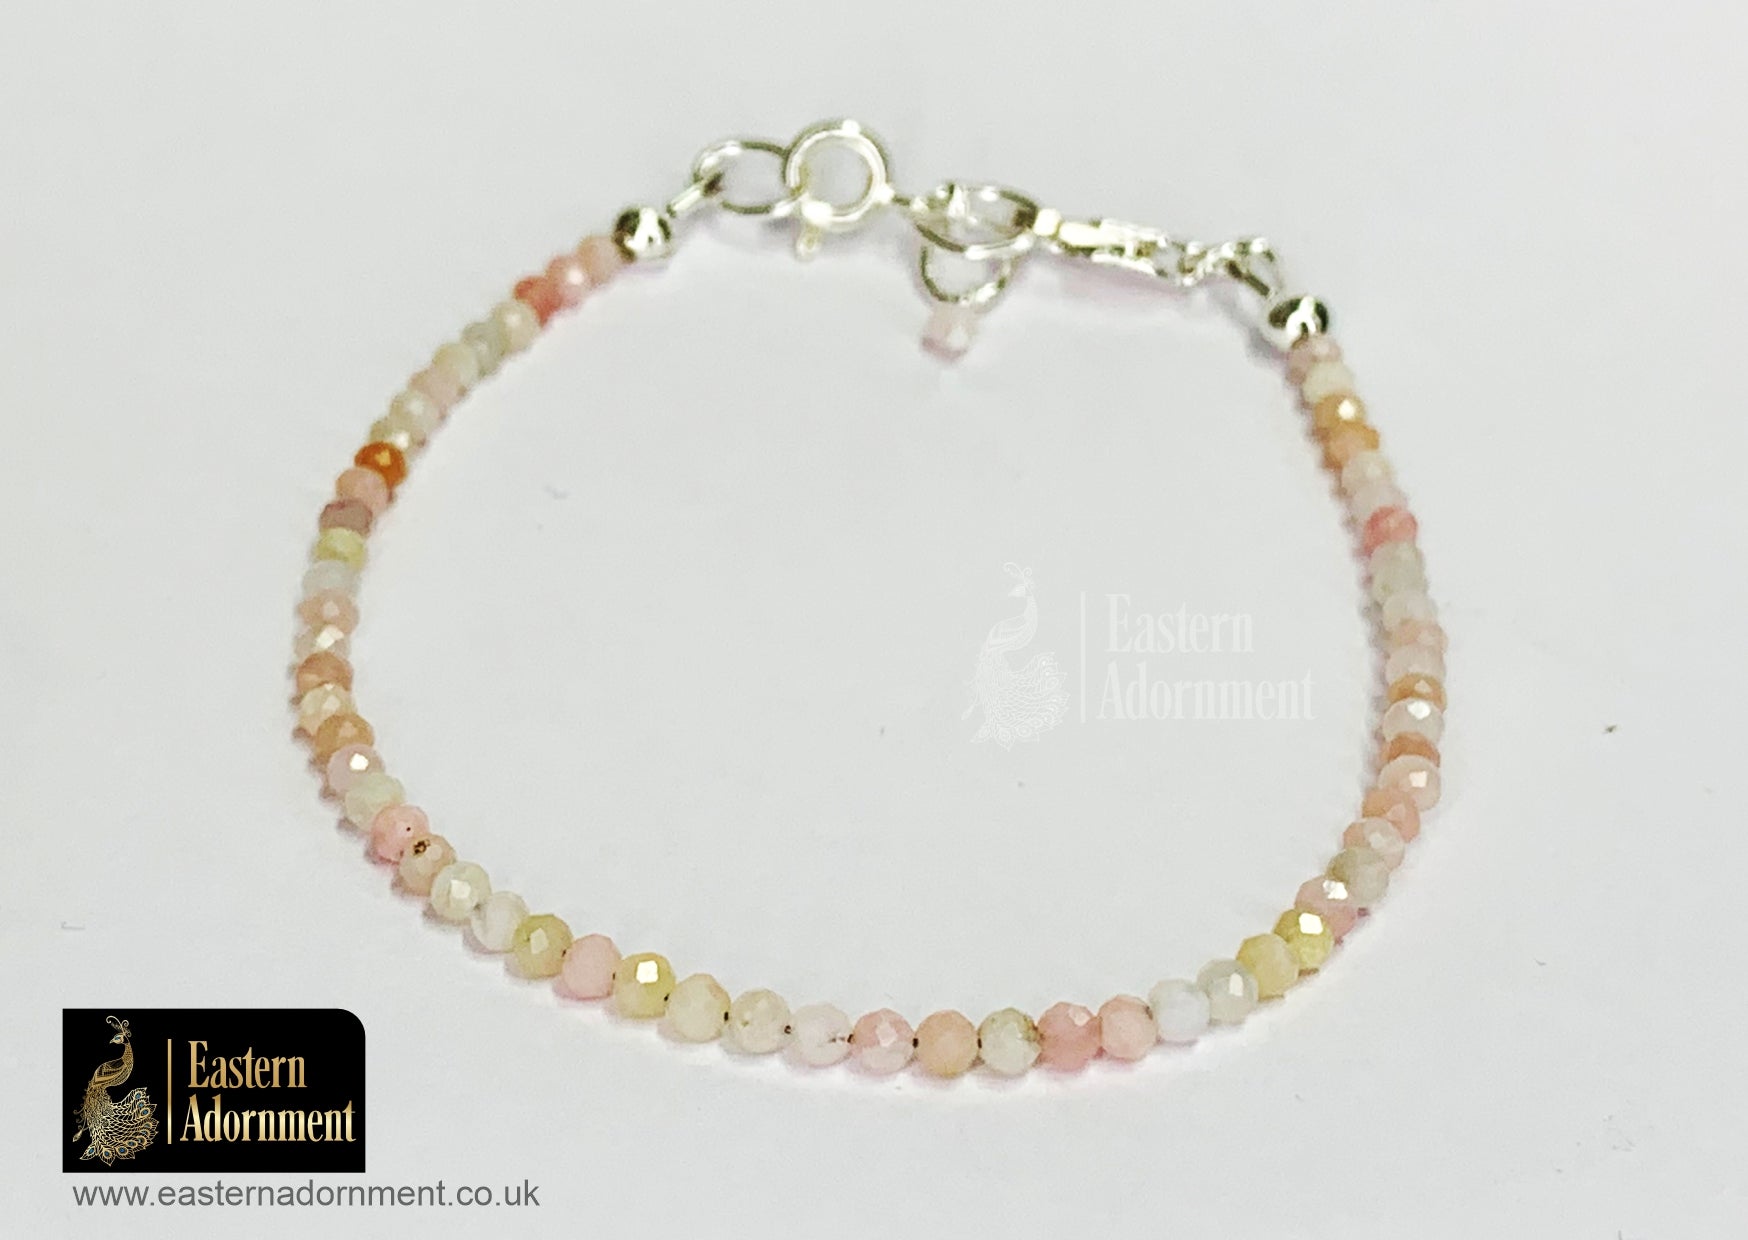 Pink Opal Micro Cut Bead Bracelet with Silver Charm Clasp